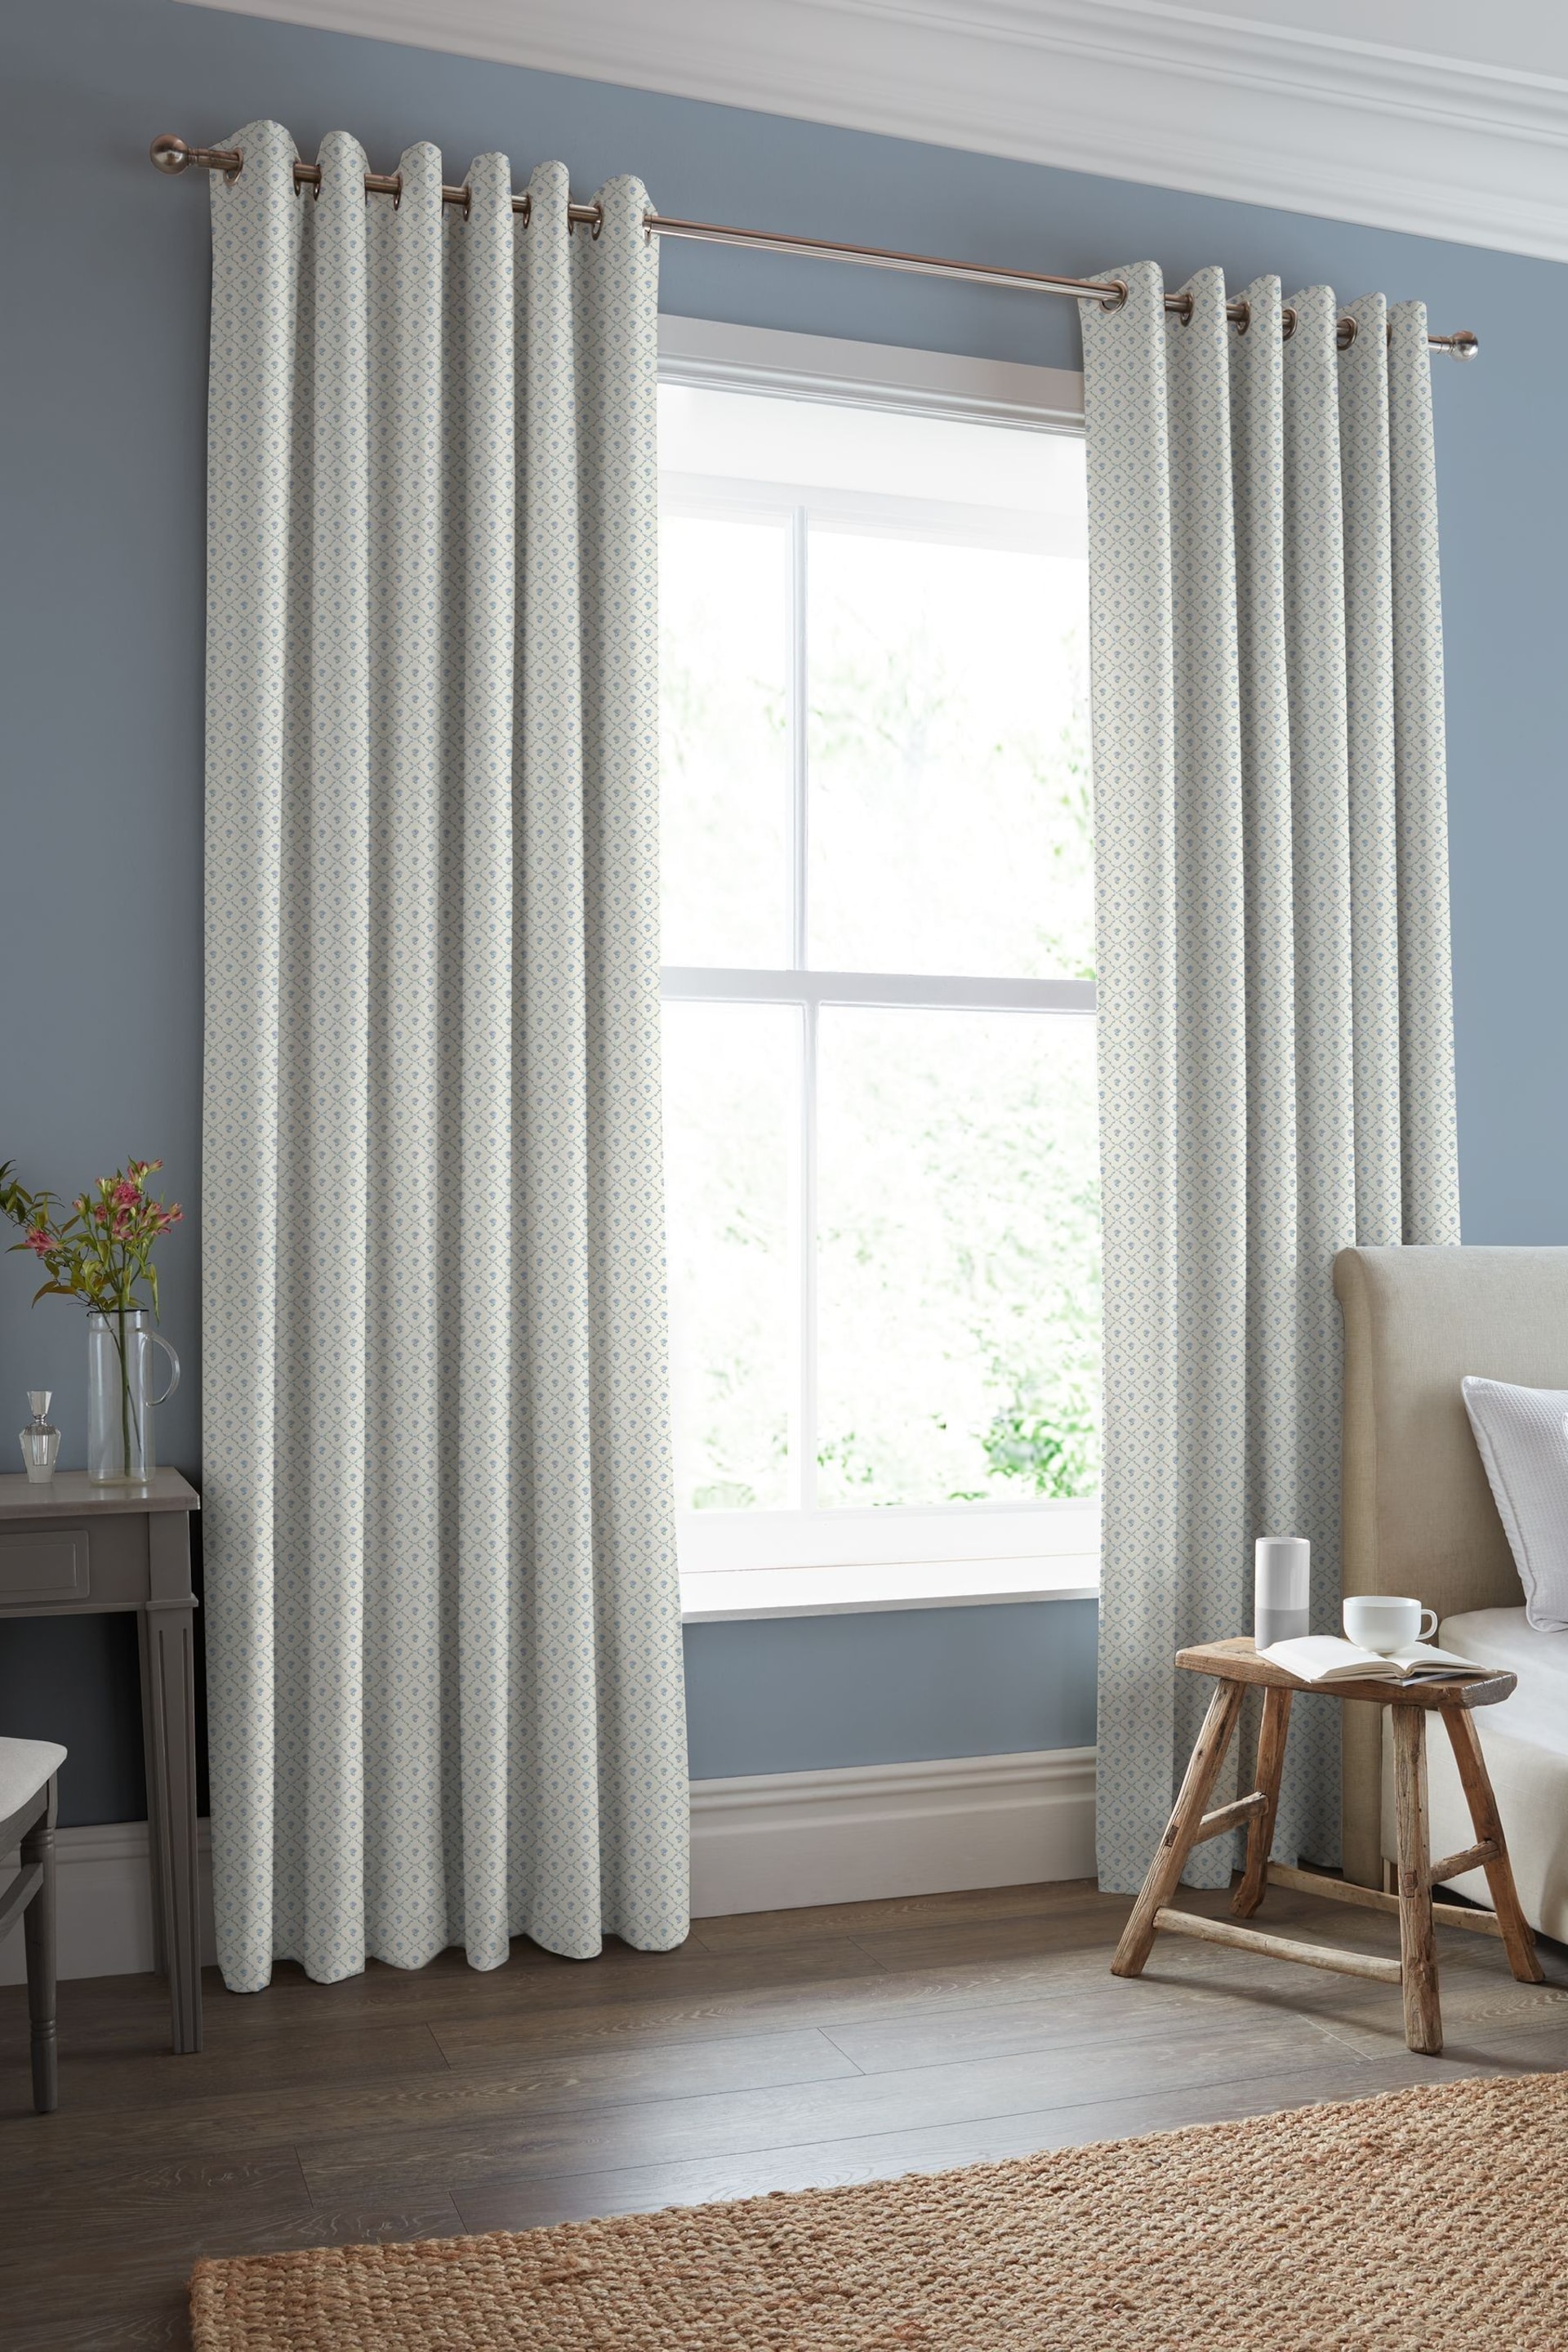 Laura Ashley Pale Seaspray Blue Kate Made to Measure Curtains - Image 2 of 9